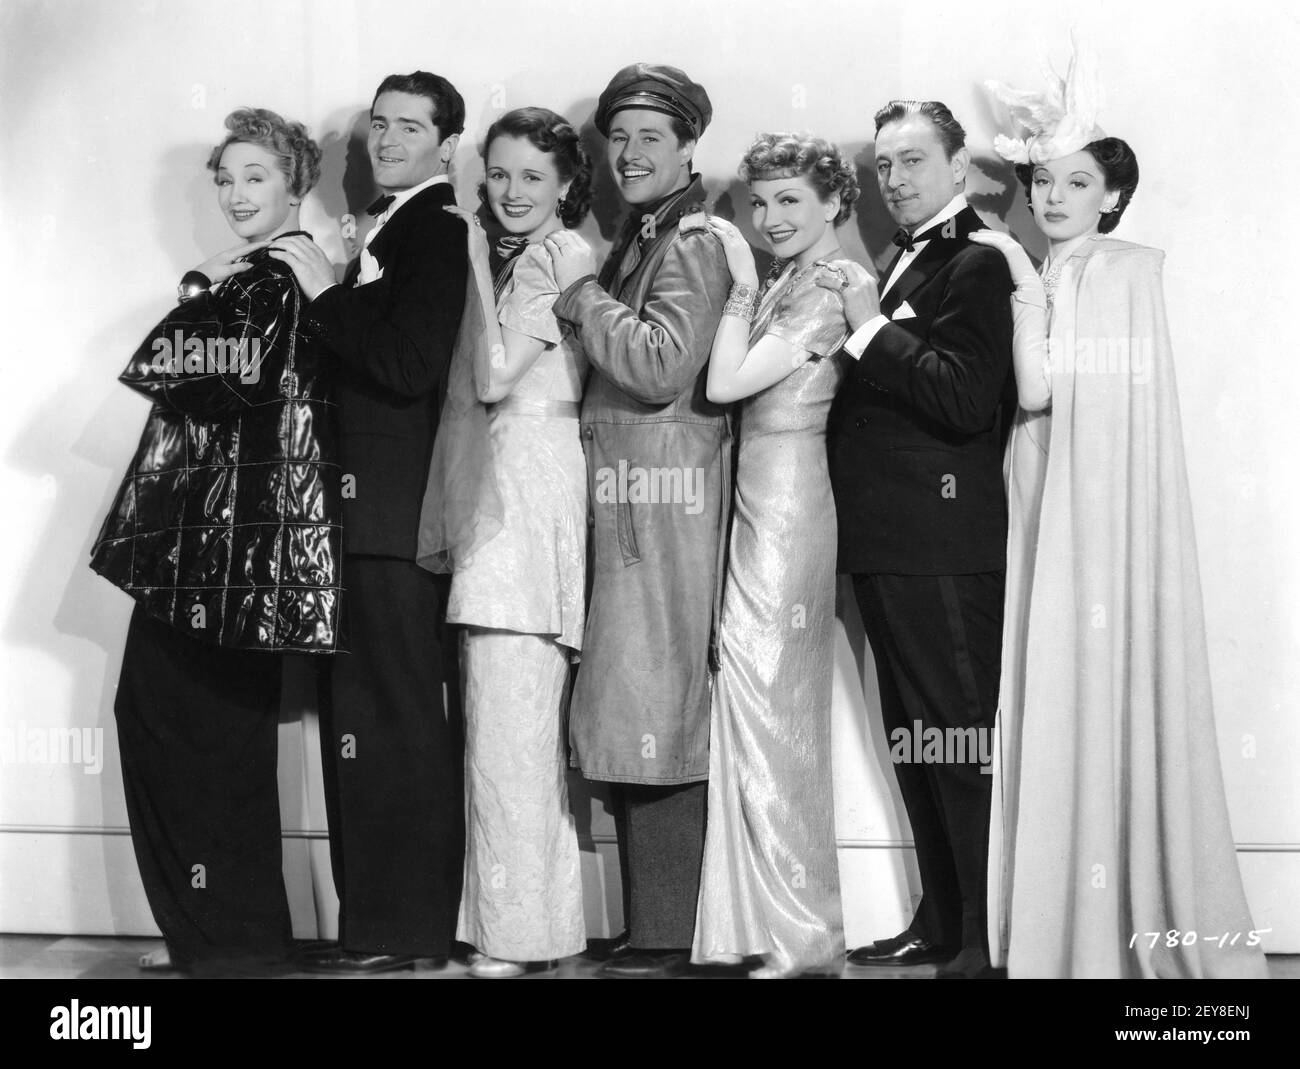 HEDDA HOPPER FRANCIS LEDERER MARY ASTOR DON AMECHE CLAUDETTE COLBERT JOHN BARRYMORE and ELAINE BARRIE Posed Group Publicity Portrait for MIDNIGHT 1939 director MITCHELL LEISEN screenplay Charles Brackett Billy Wilder Miss Colbert's Gowns by Irene Paramount Pictures Stock Photo